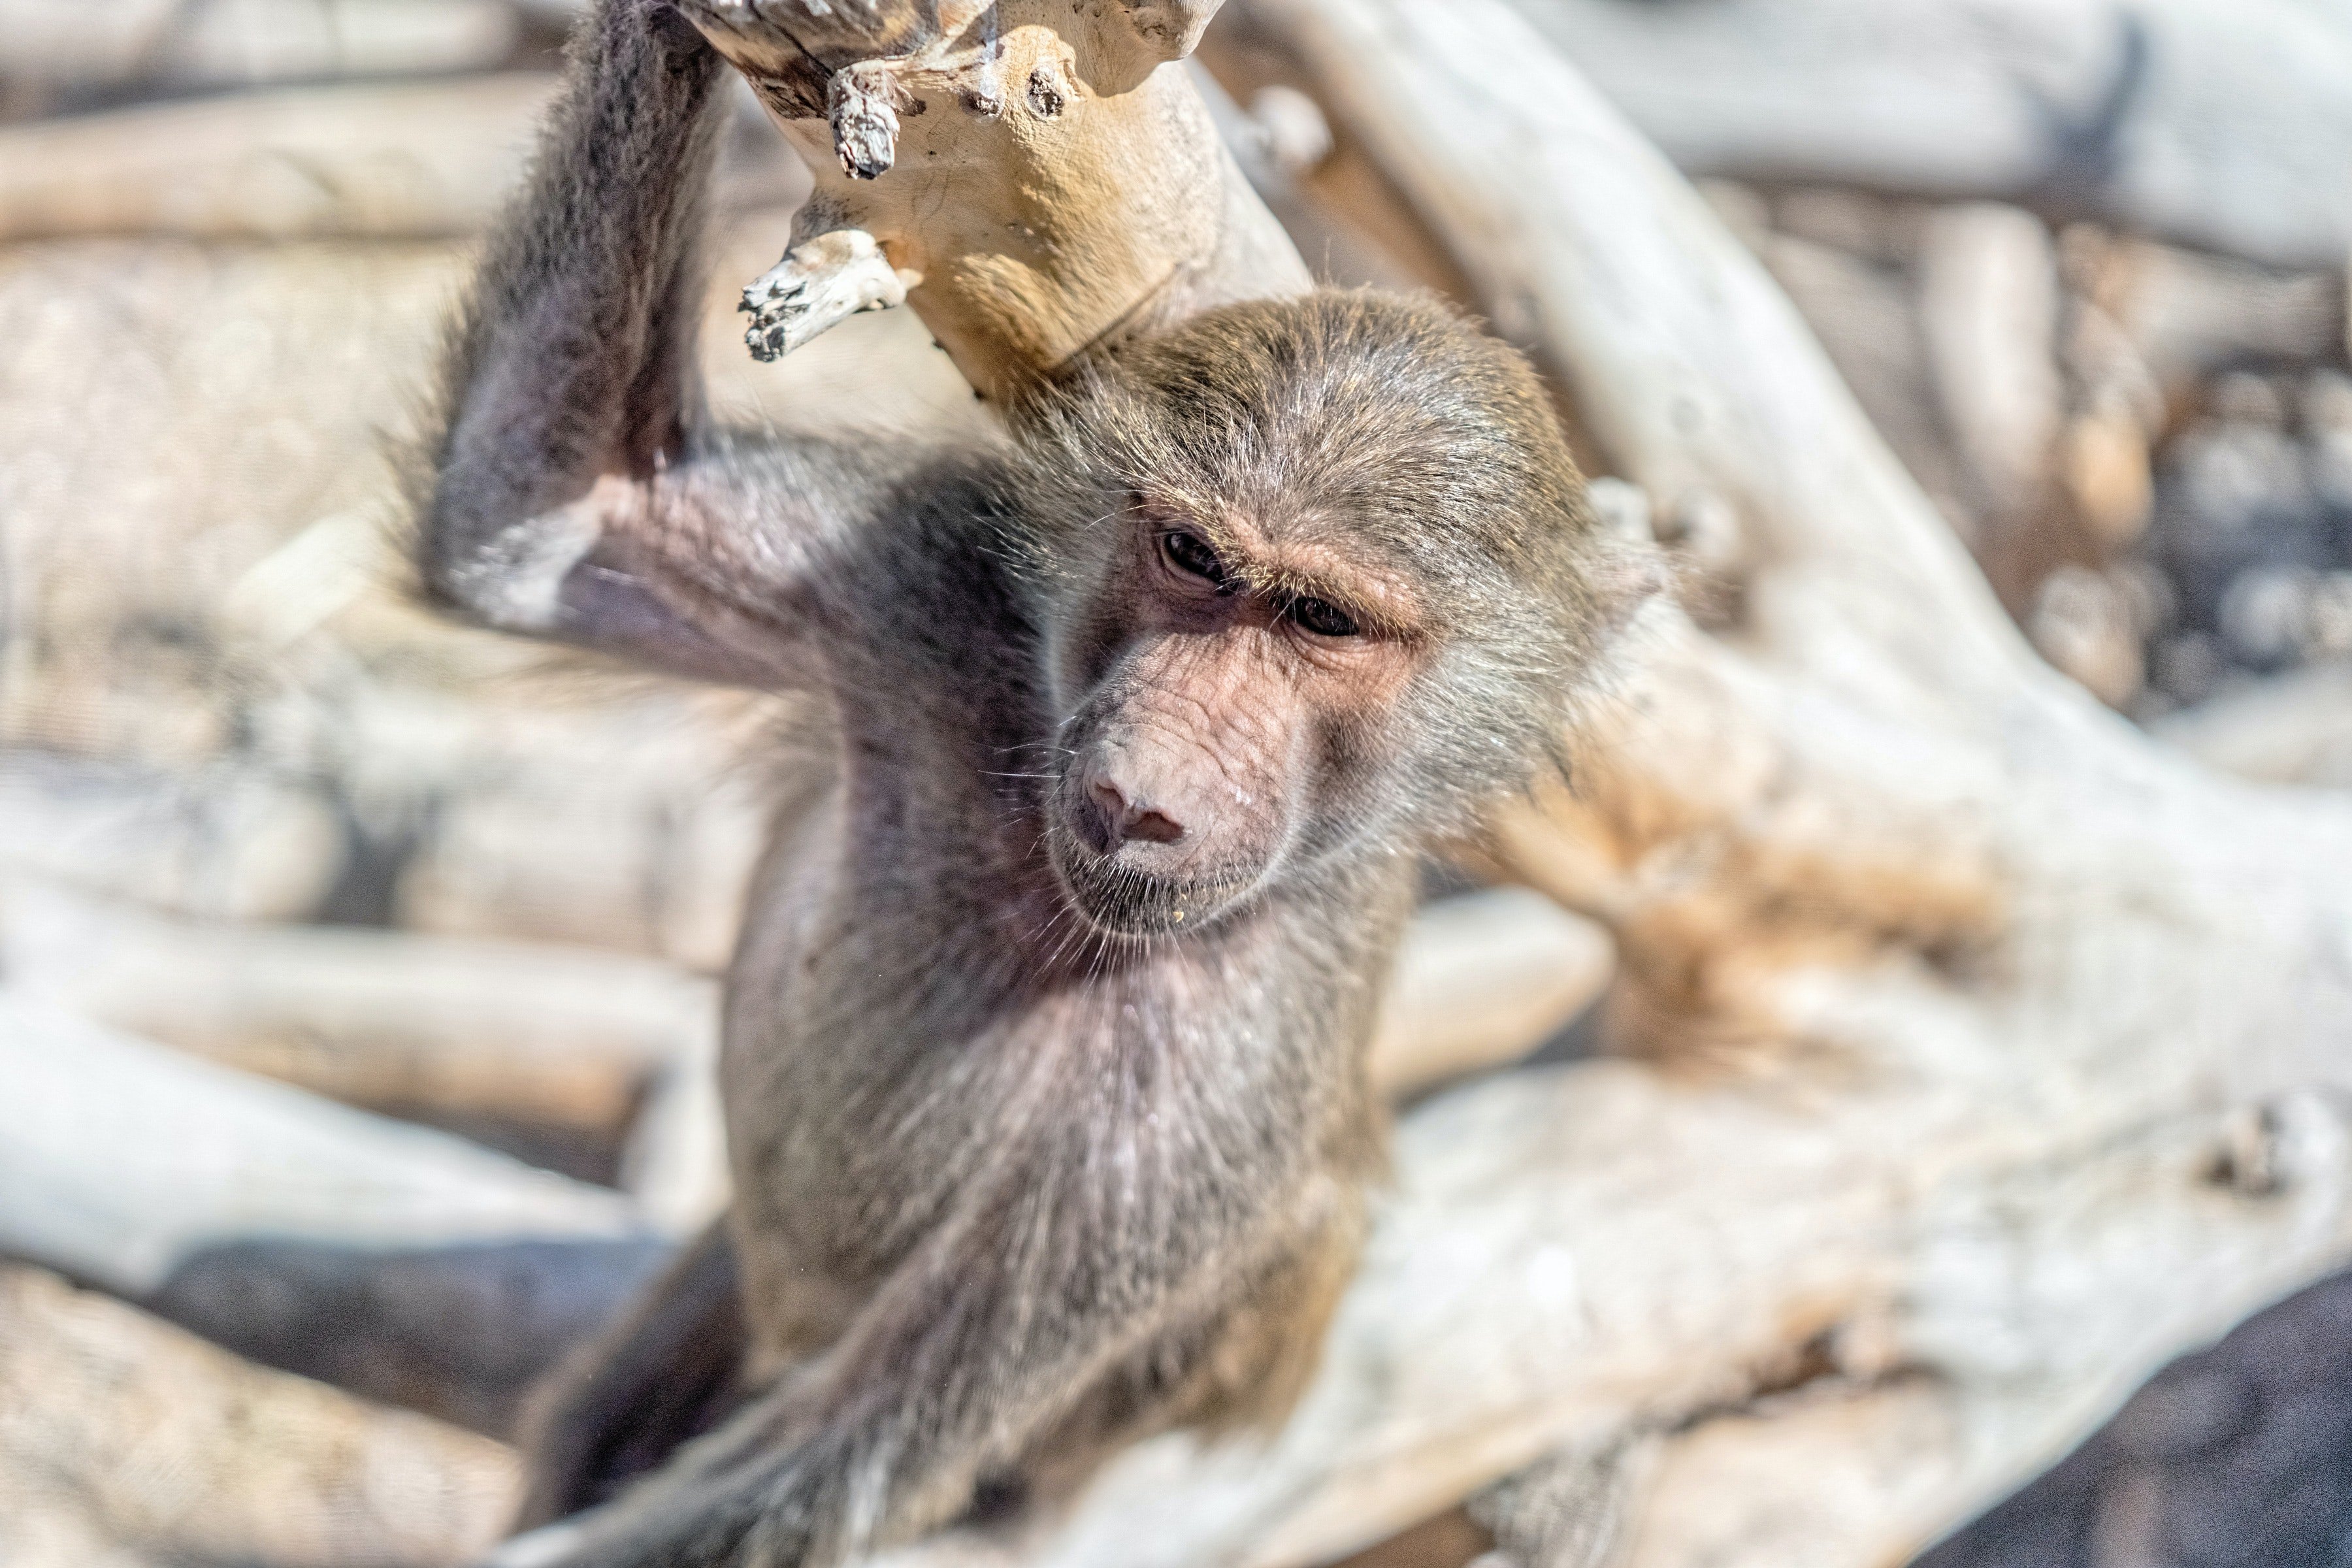 Pictured - A photo of a monkey hanging on a tree branch | Source: Pexels 